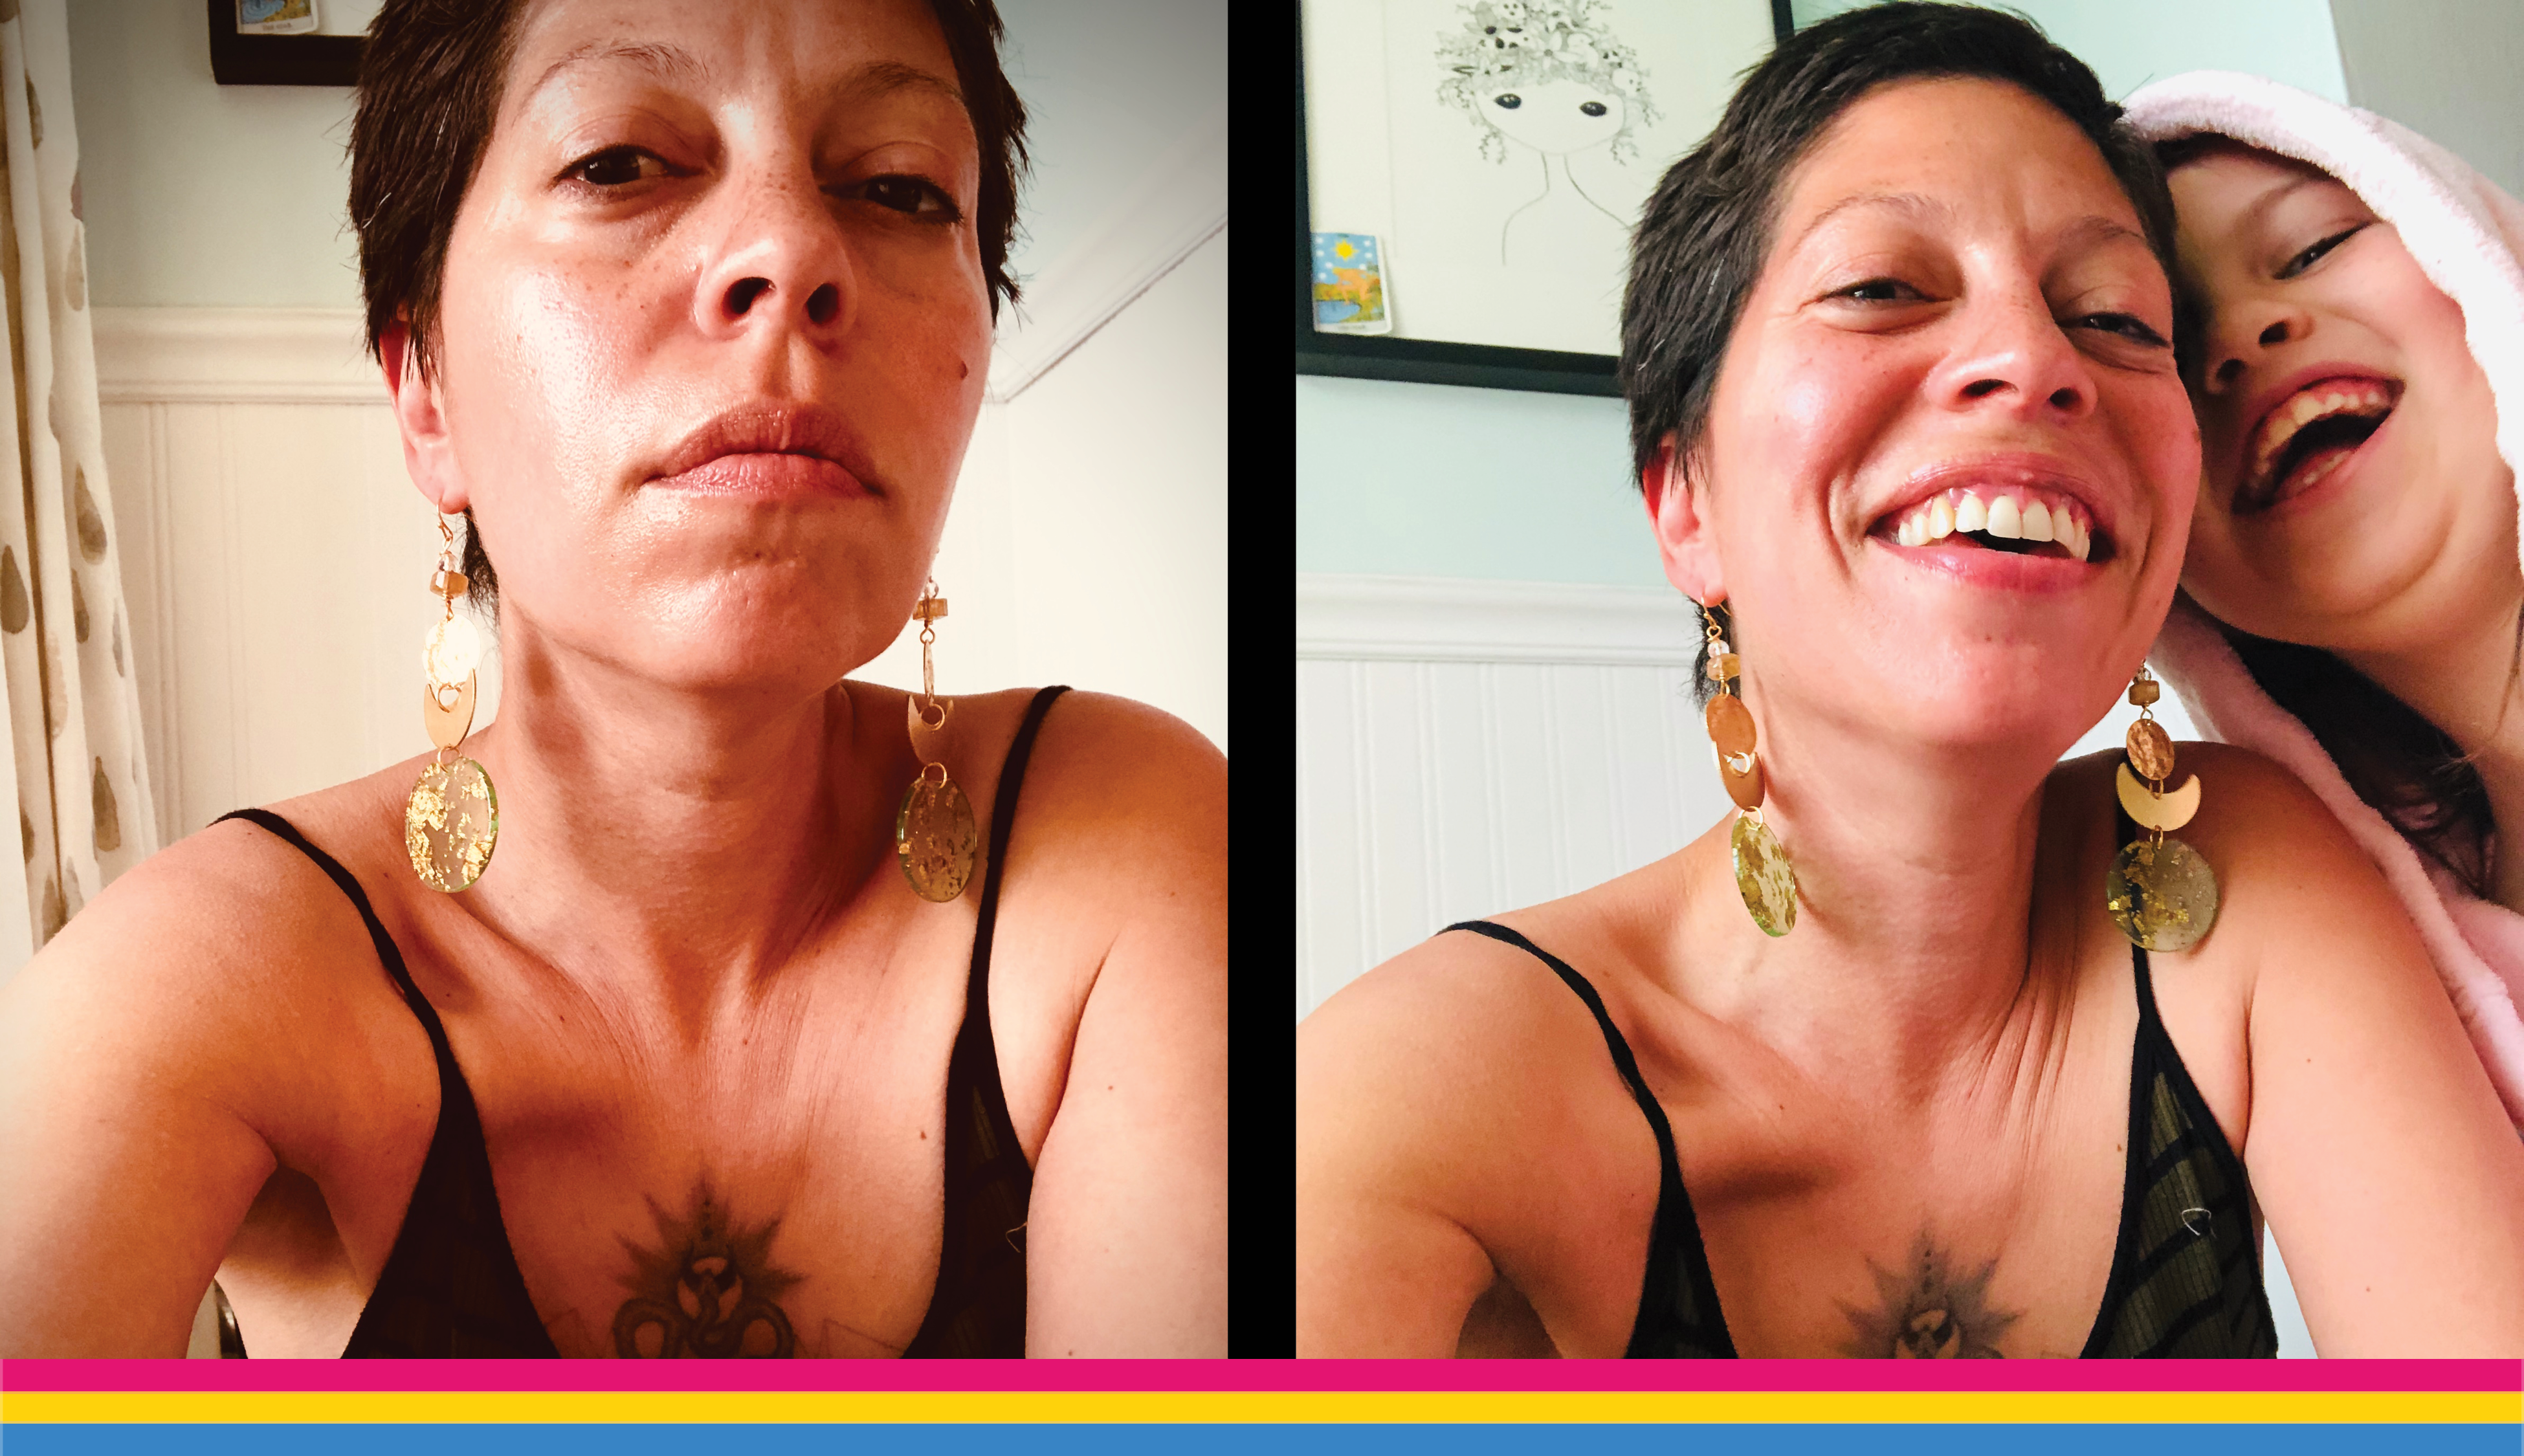 Two images arranged side-by-side in dyptich: To the left, Candida, a nonbinary Boriken-American person with short dark hair and long, magical earrings, looks stoically at the camera. To the right, Candida in the same pose, but smiling widely as their child photobombs the frame.